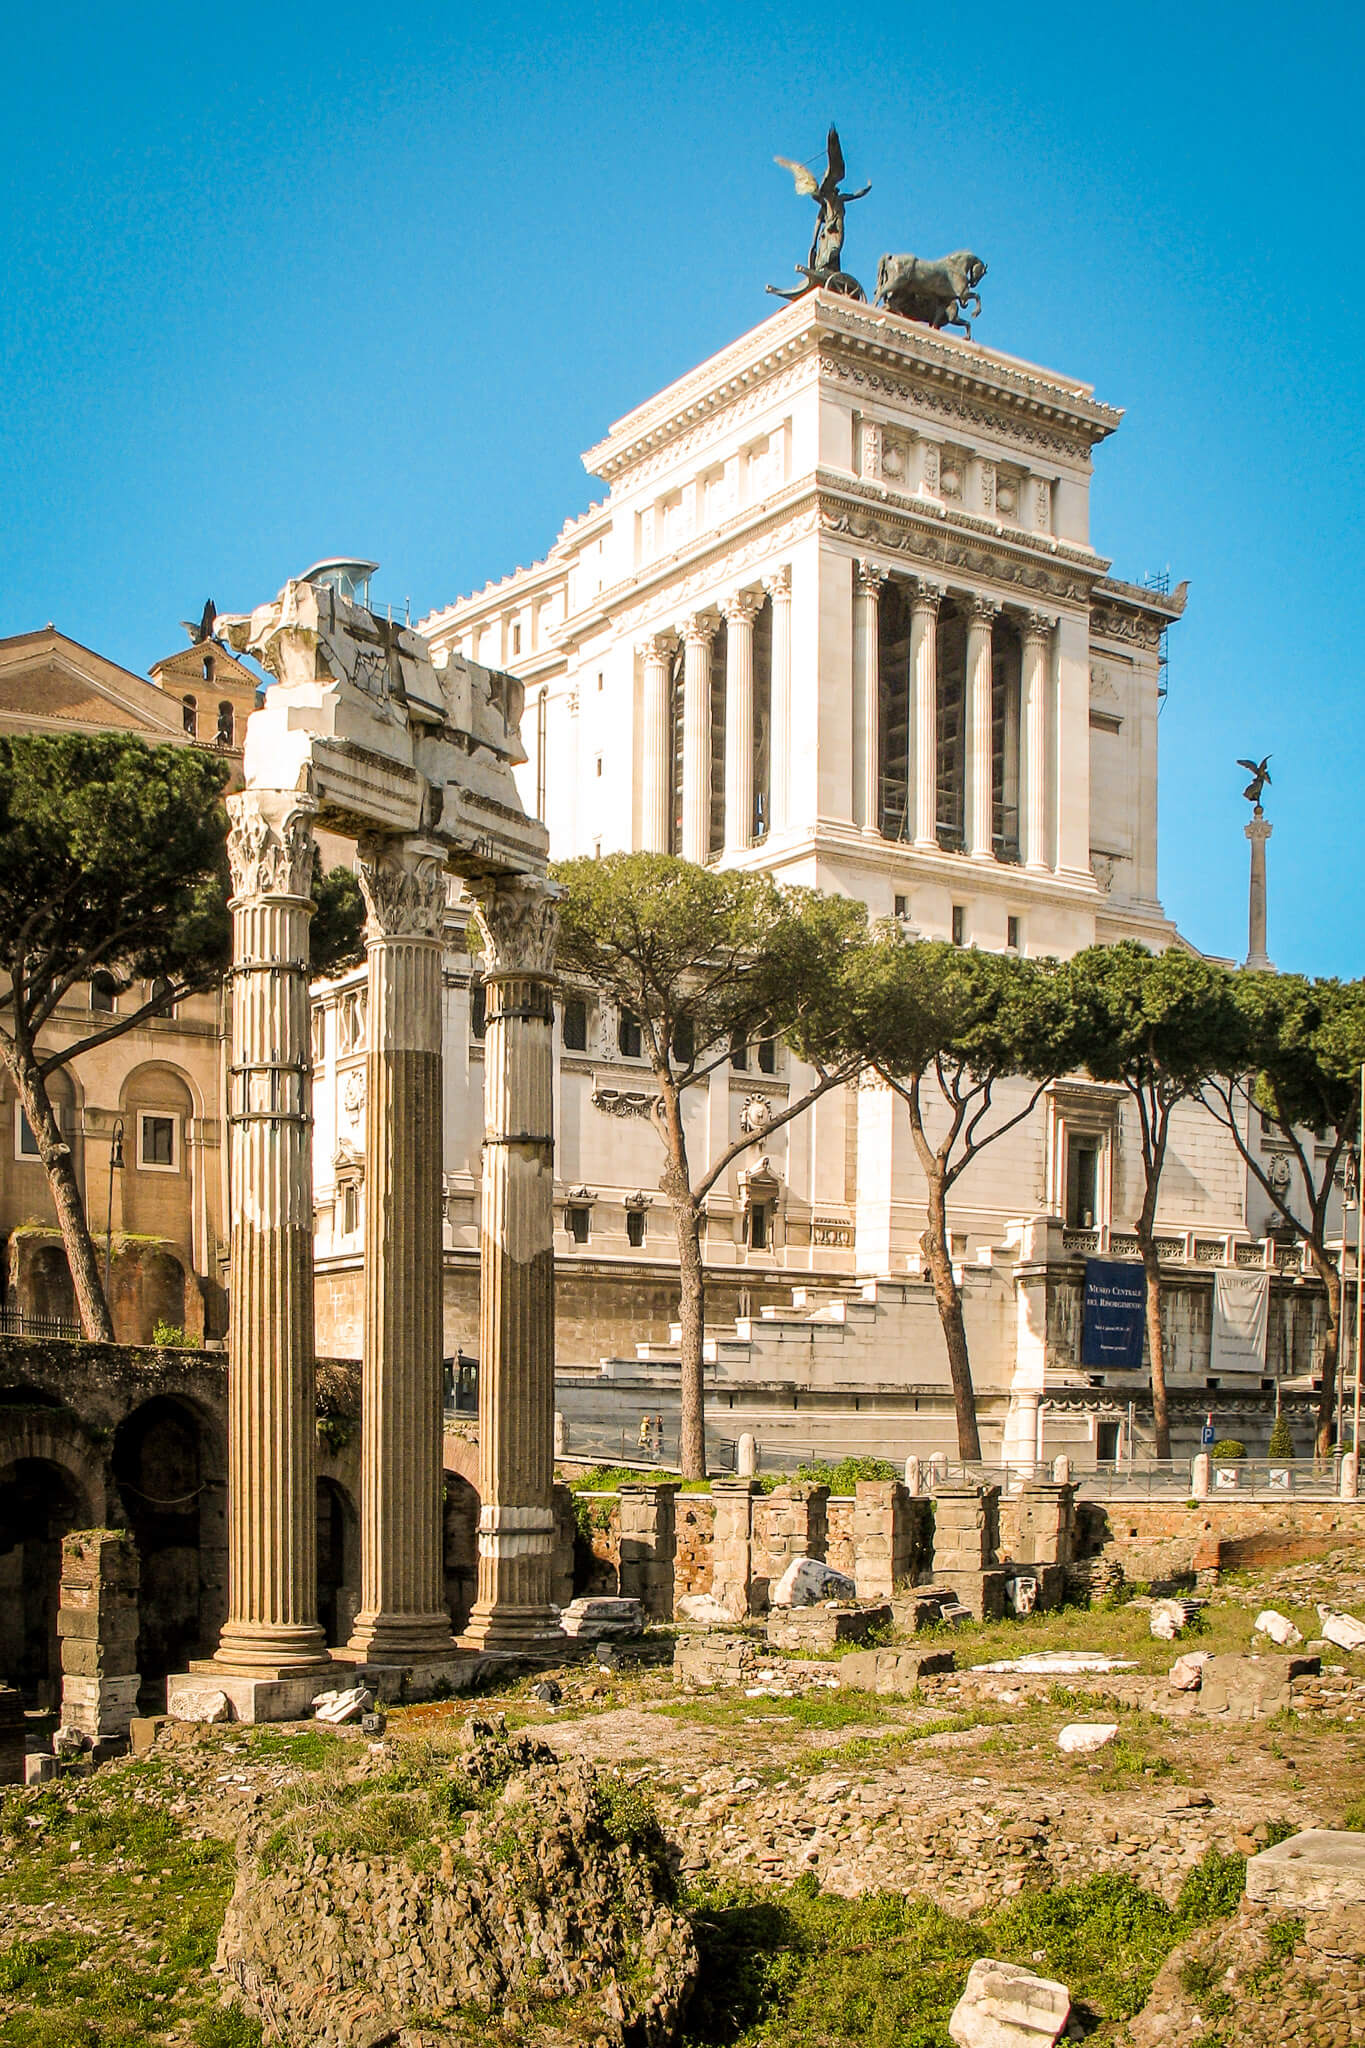 The monument to Victor Emmanuelle II viewed from the Roman Forum